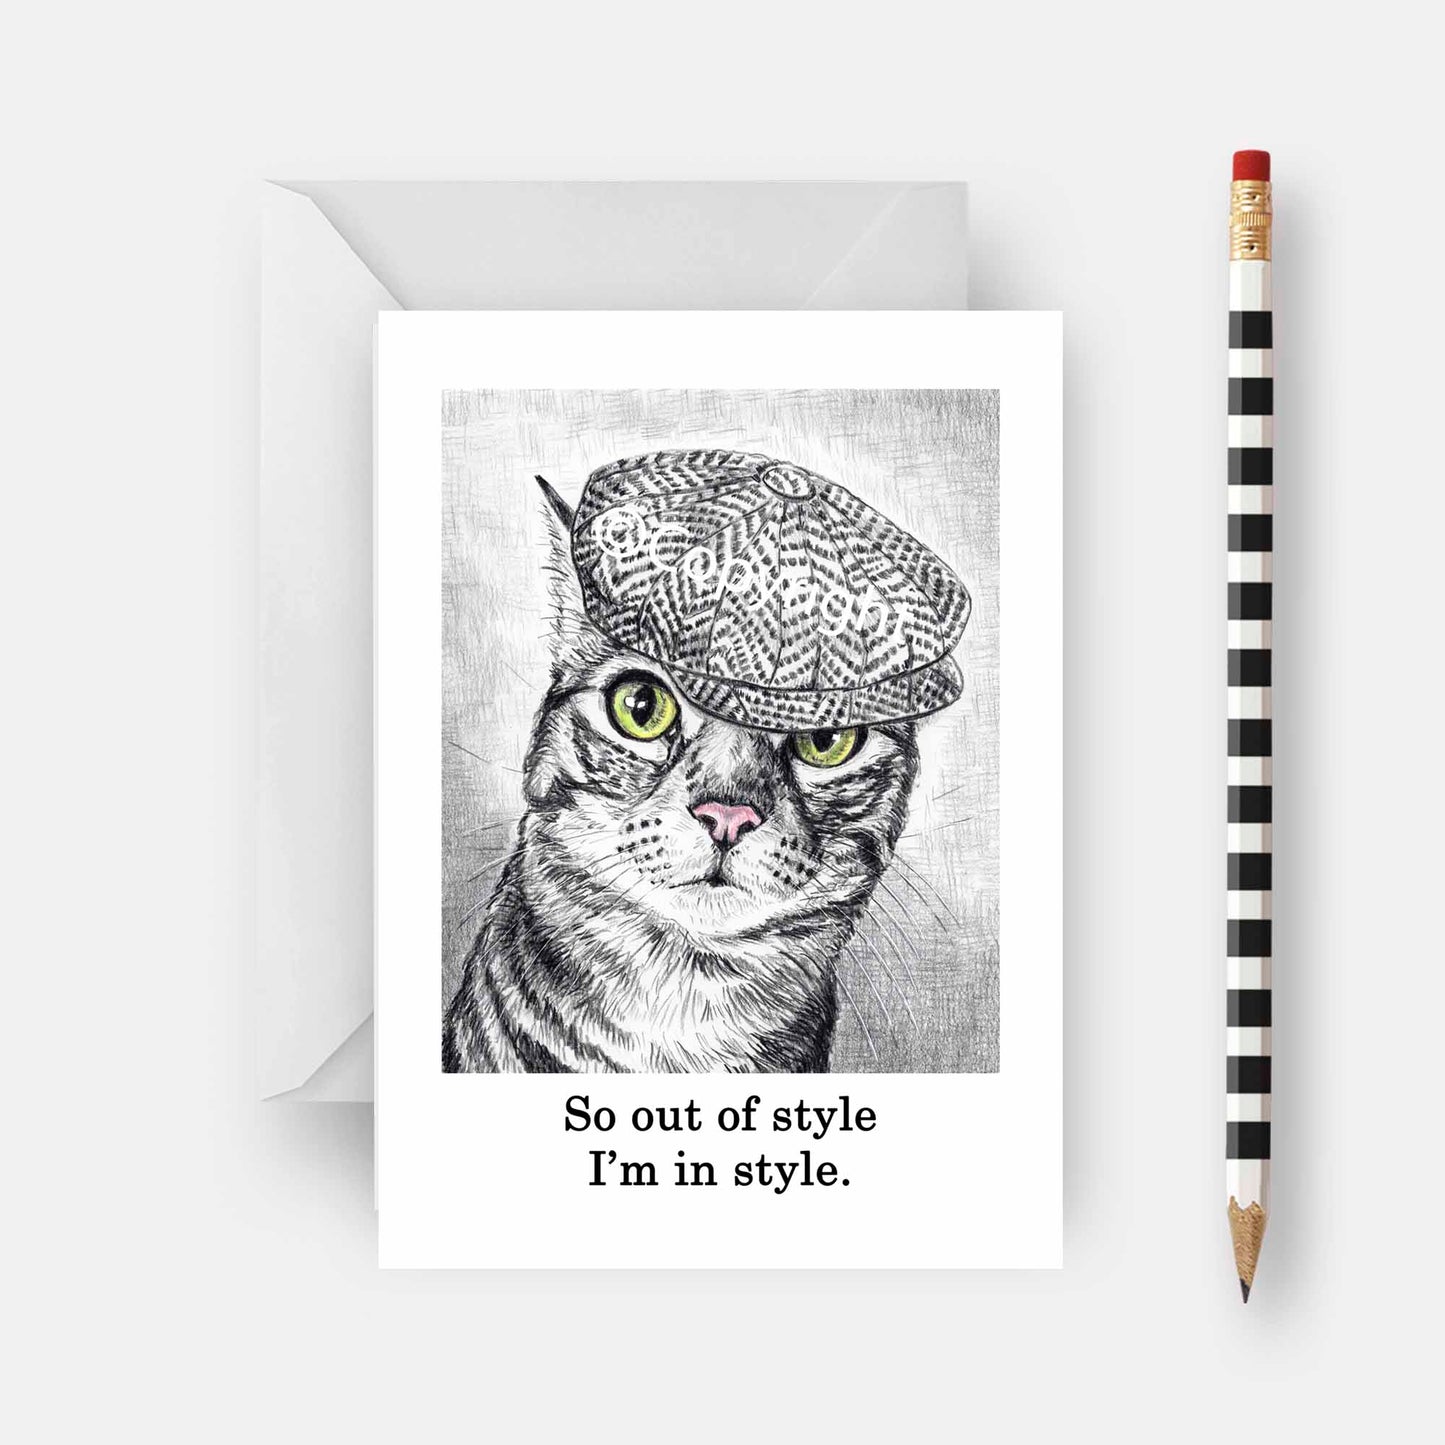 Blank greeting card featuring a black and white wax pastel drawing of tabby cat wearing a cap. Art by Deidre Wicks